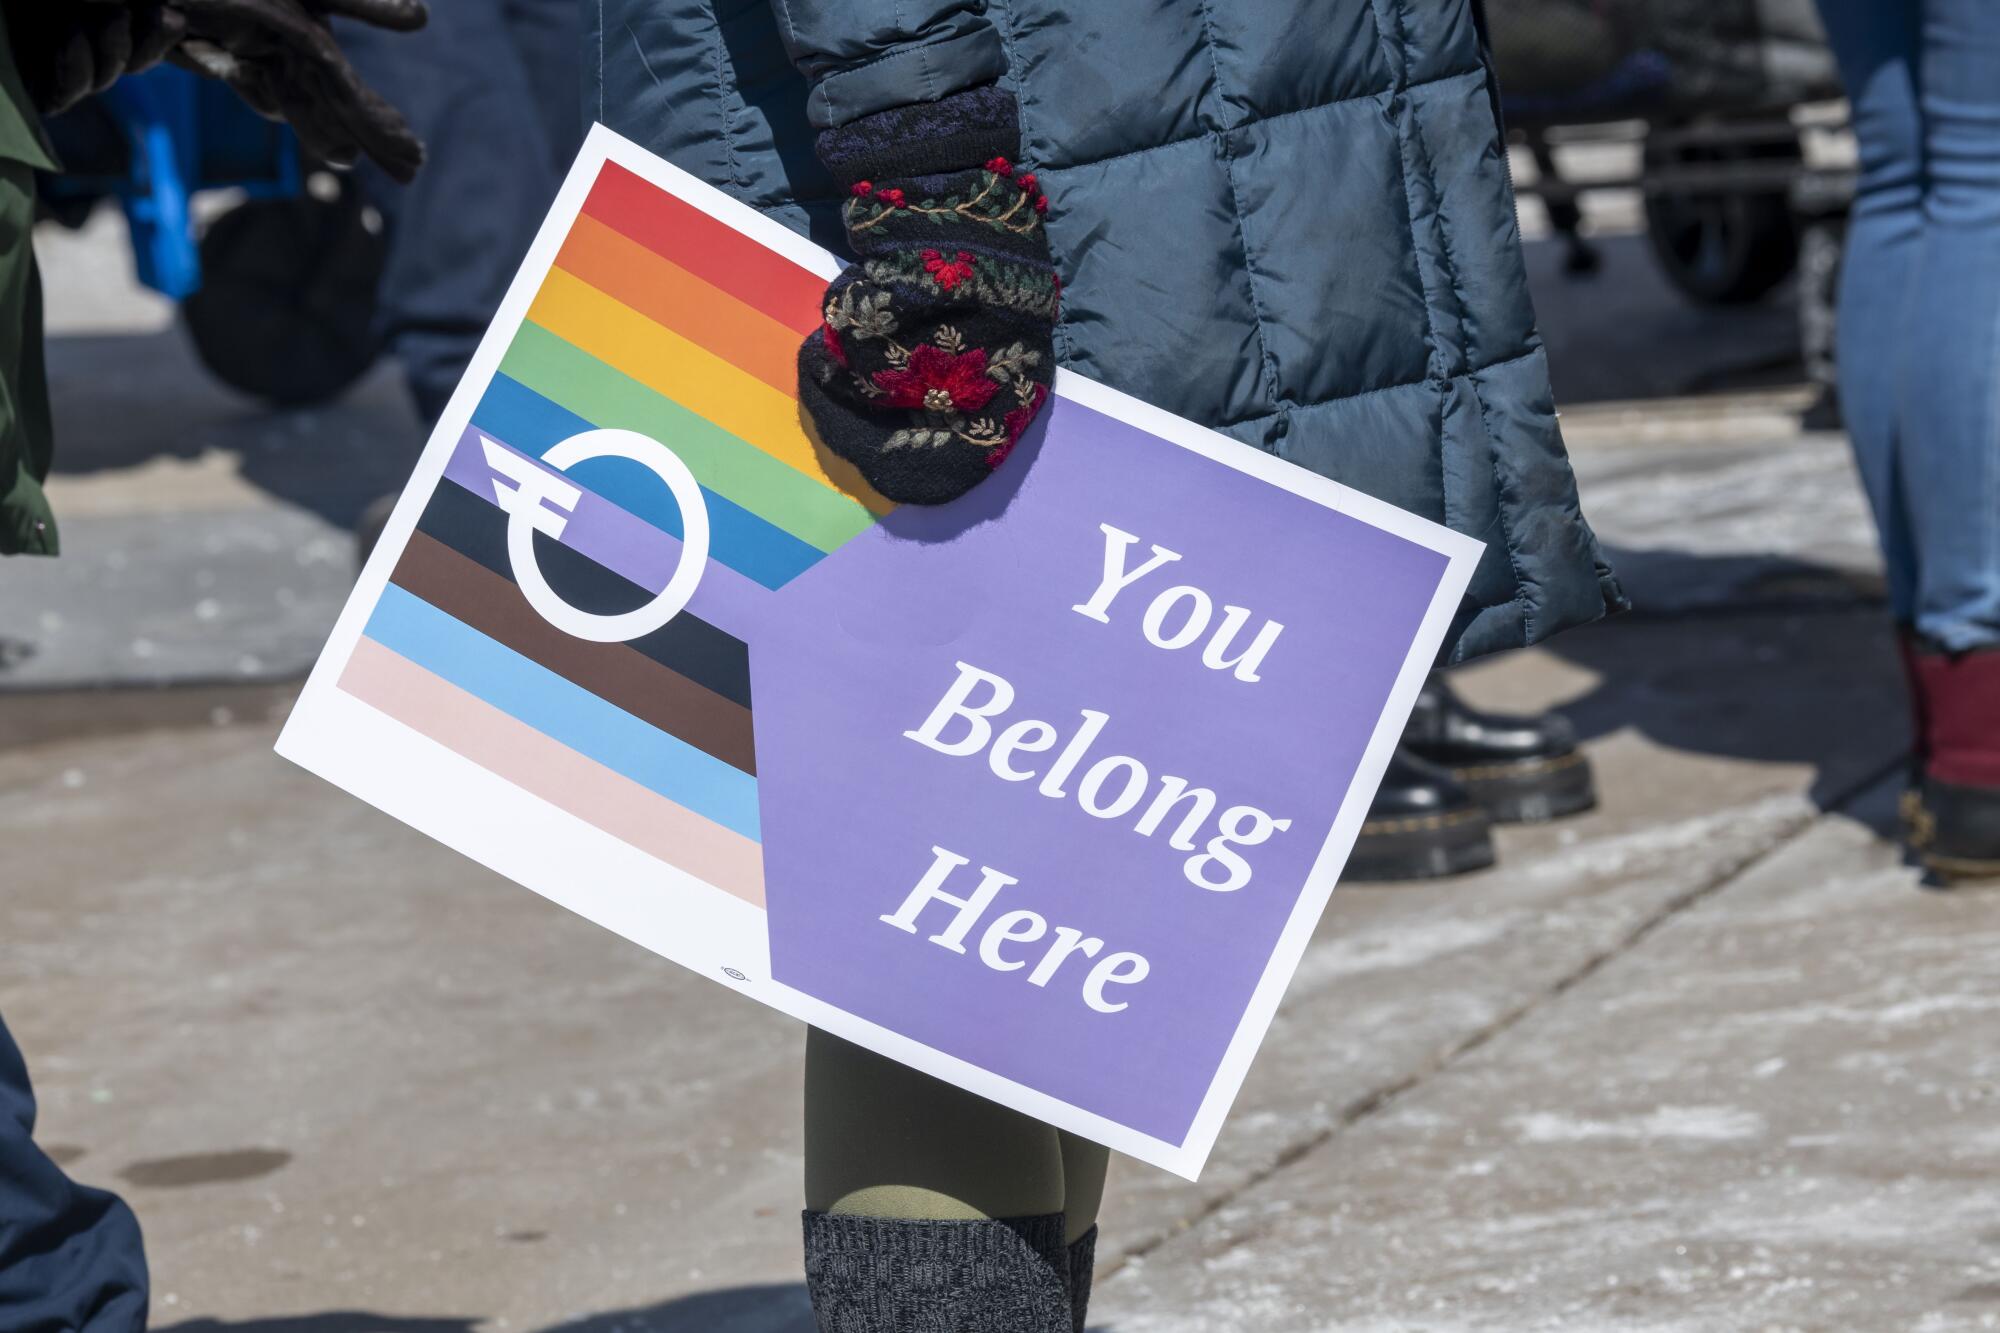 Activists and community members celebrate Transgender Day of Visibility on March 31 in St. Paul, Minn.